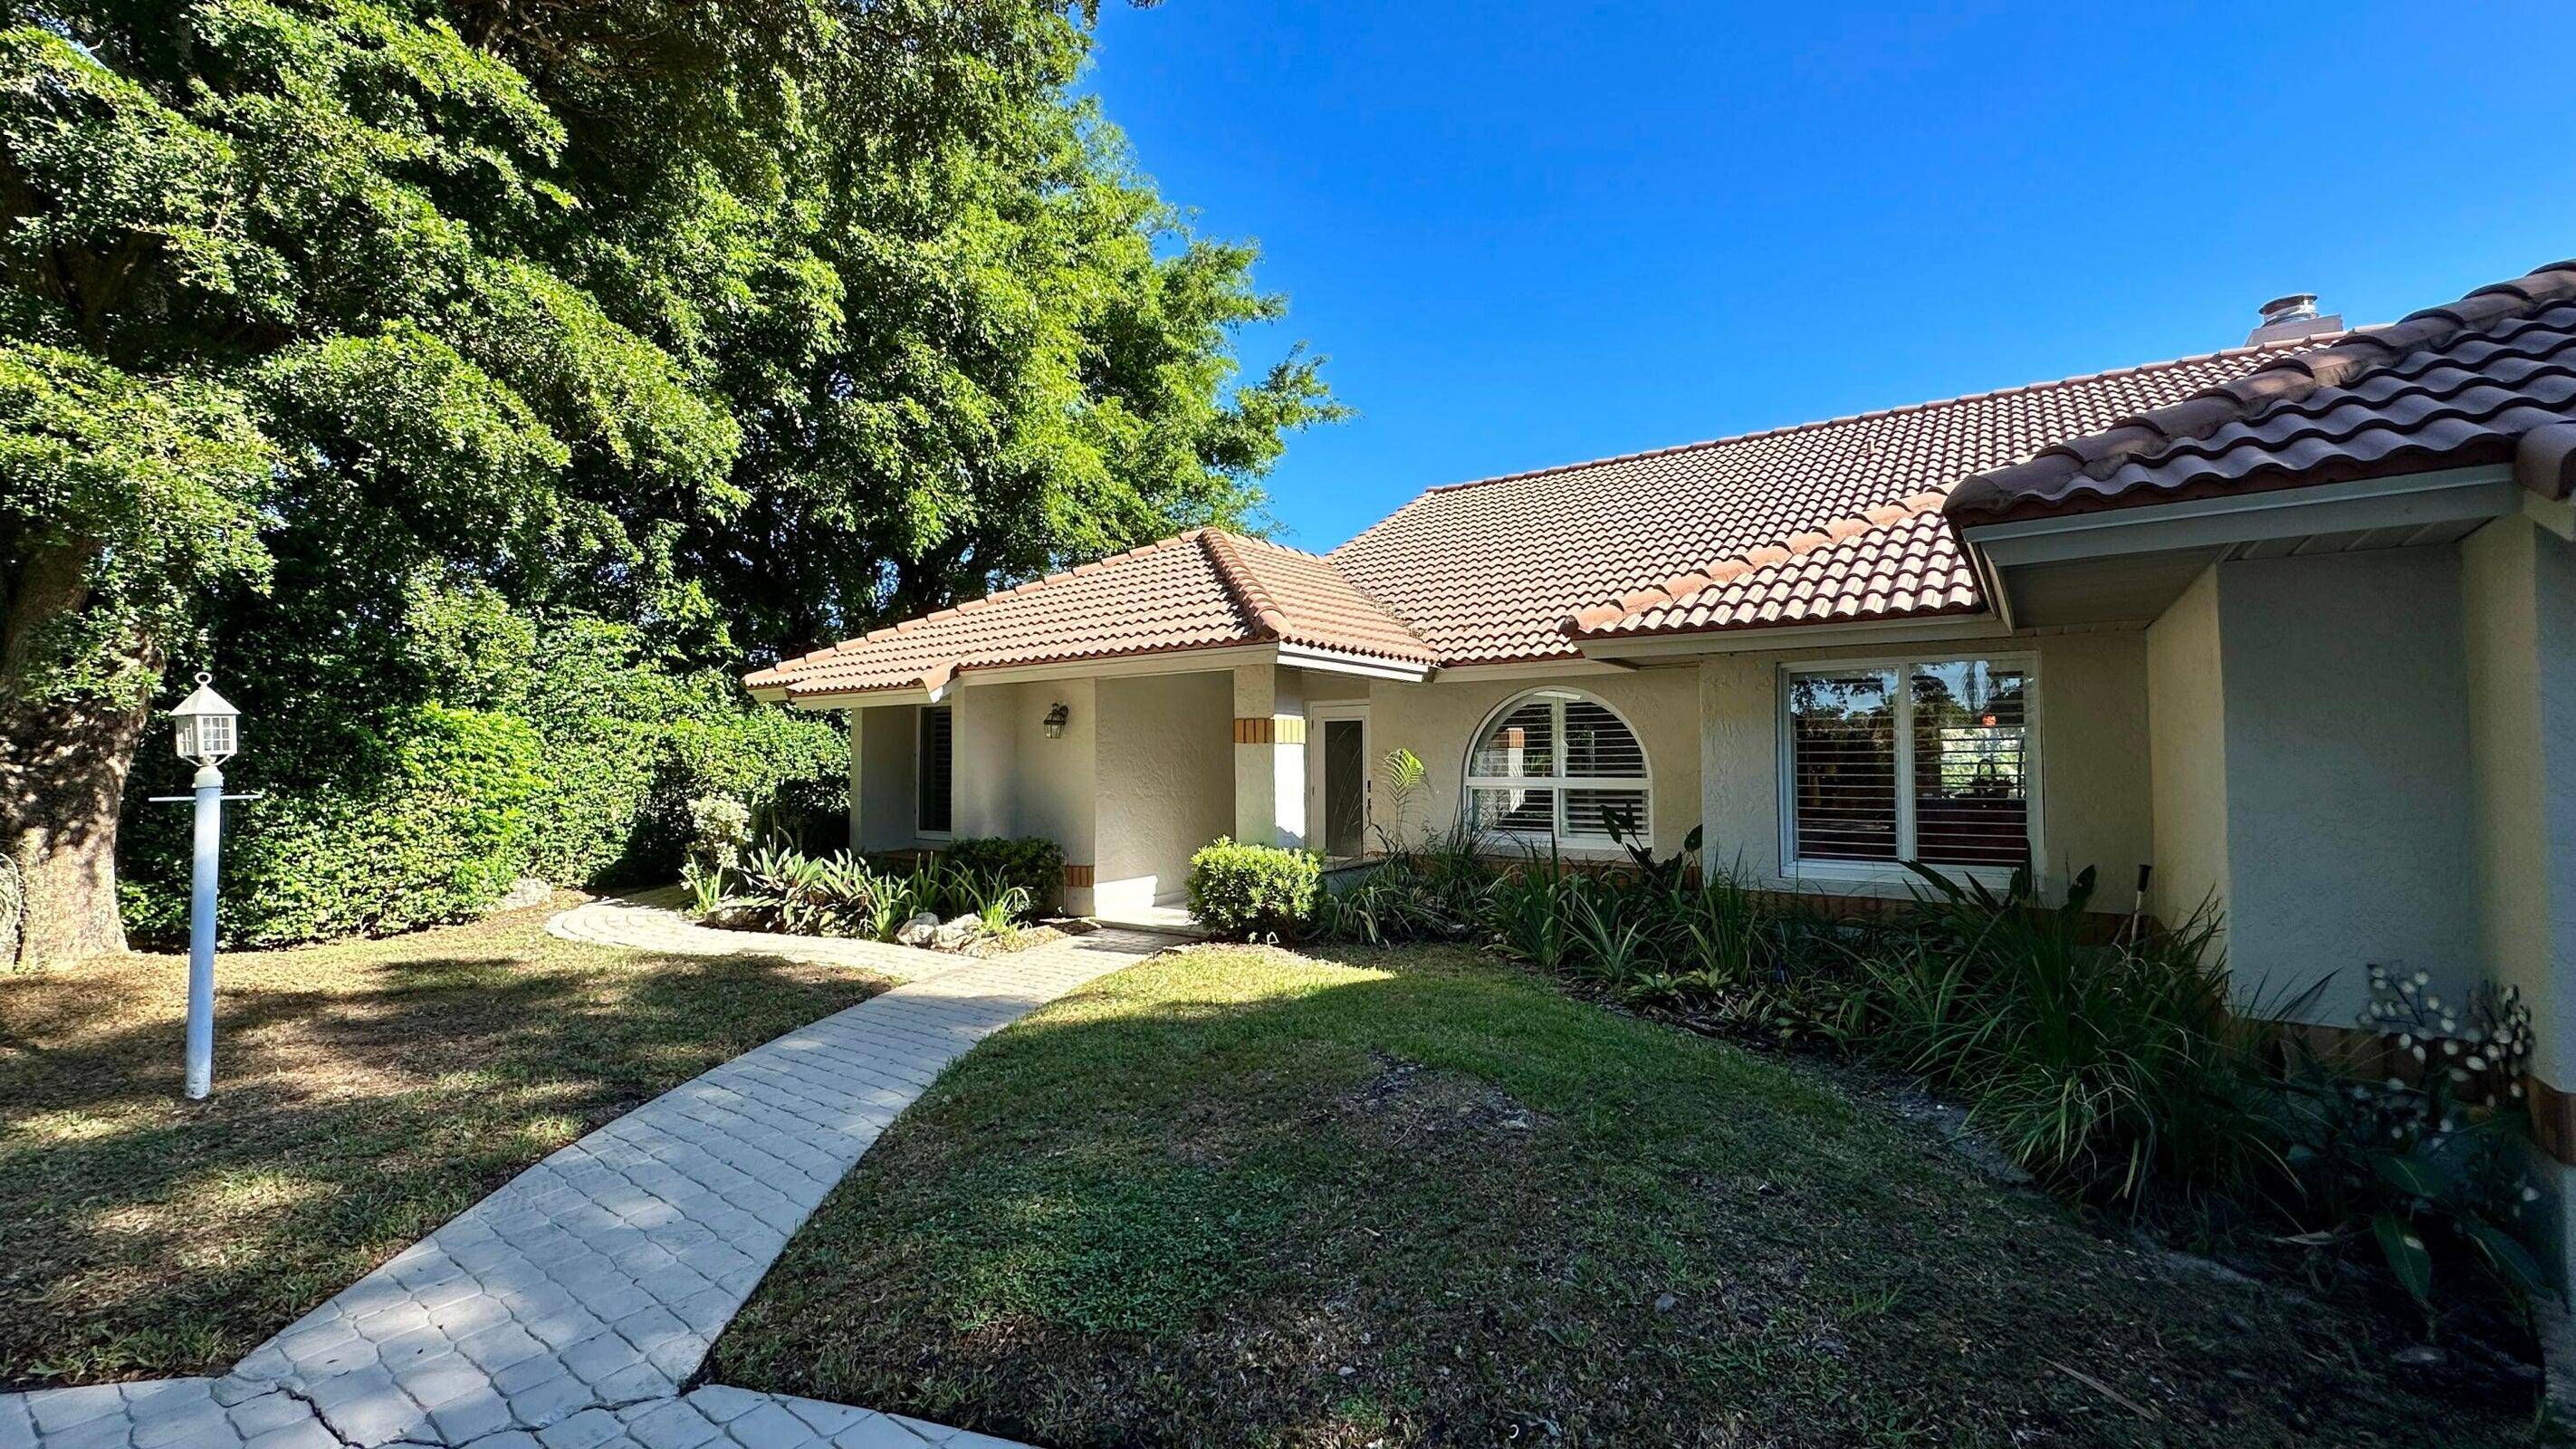 Experience the ultimate Florida lifestyle in this stunning 4 bedroom house, strategically situated in the beautiful Boca Raton.